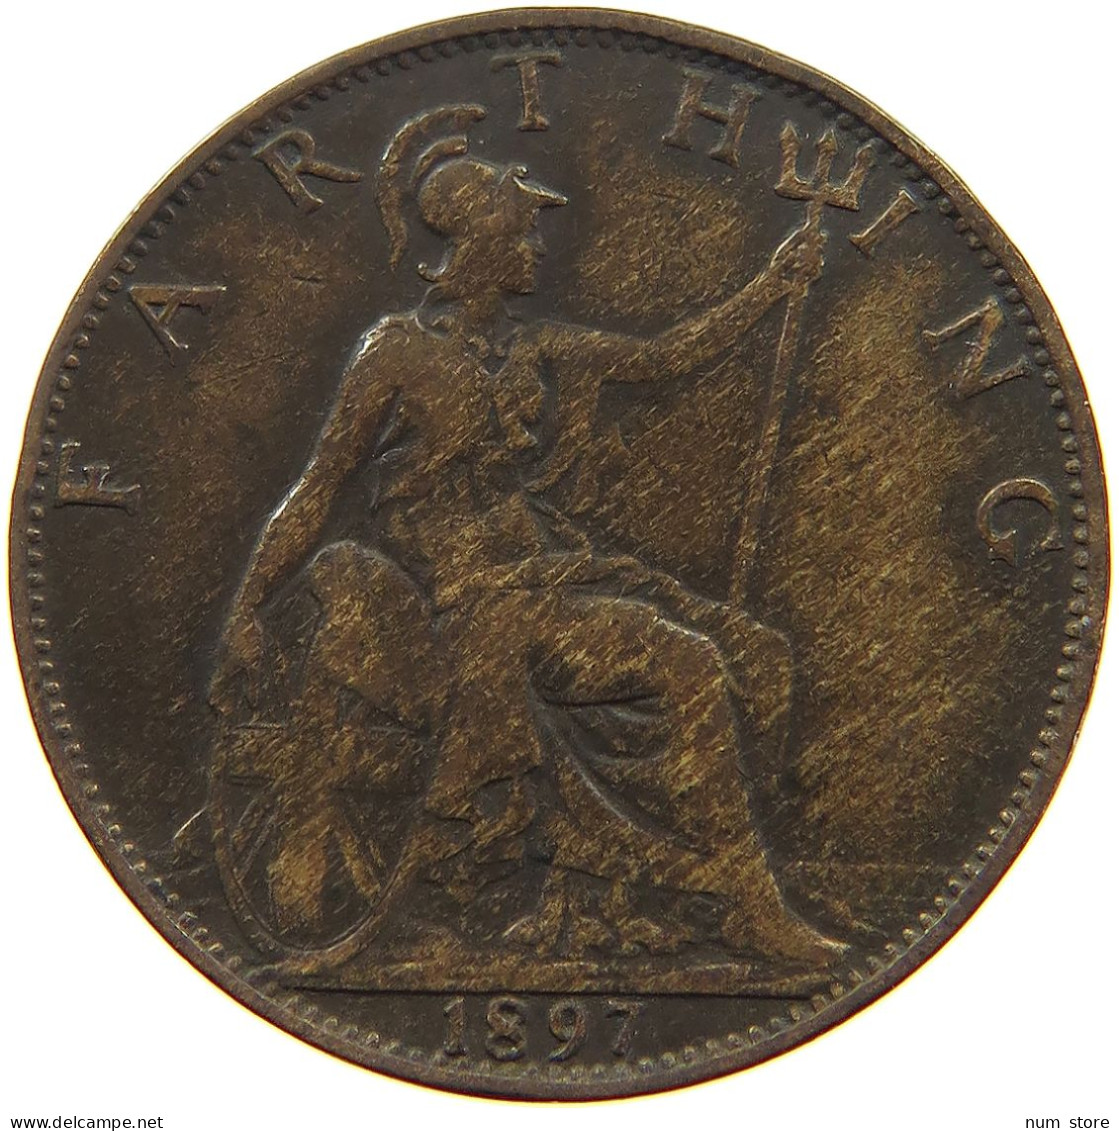 GREAT BRITAIN FARTHING 1897 Victoria 1837-1901 #a011 0969 - B. 1 Farthing